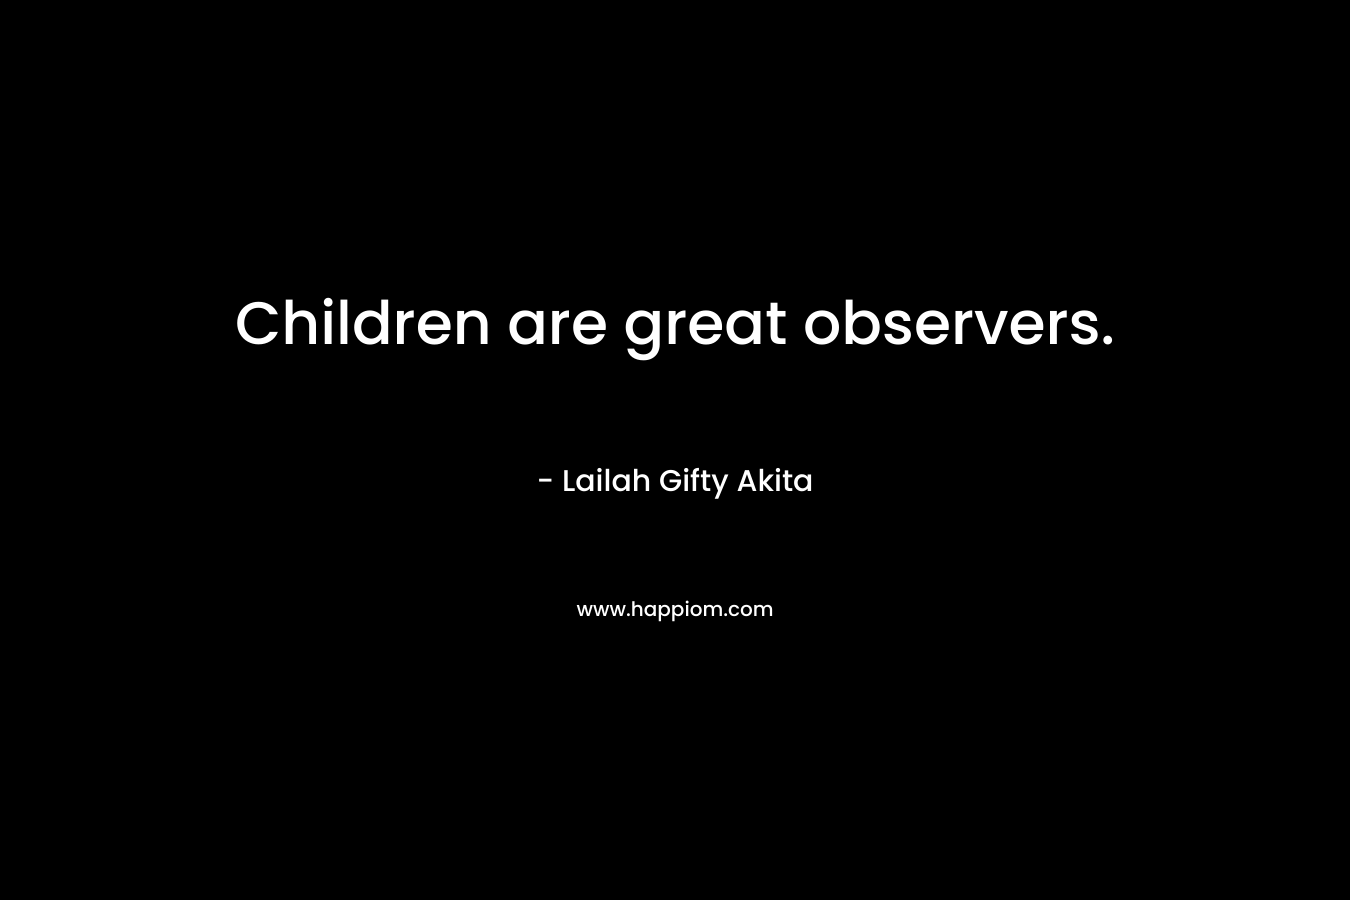 Children are great observers.